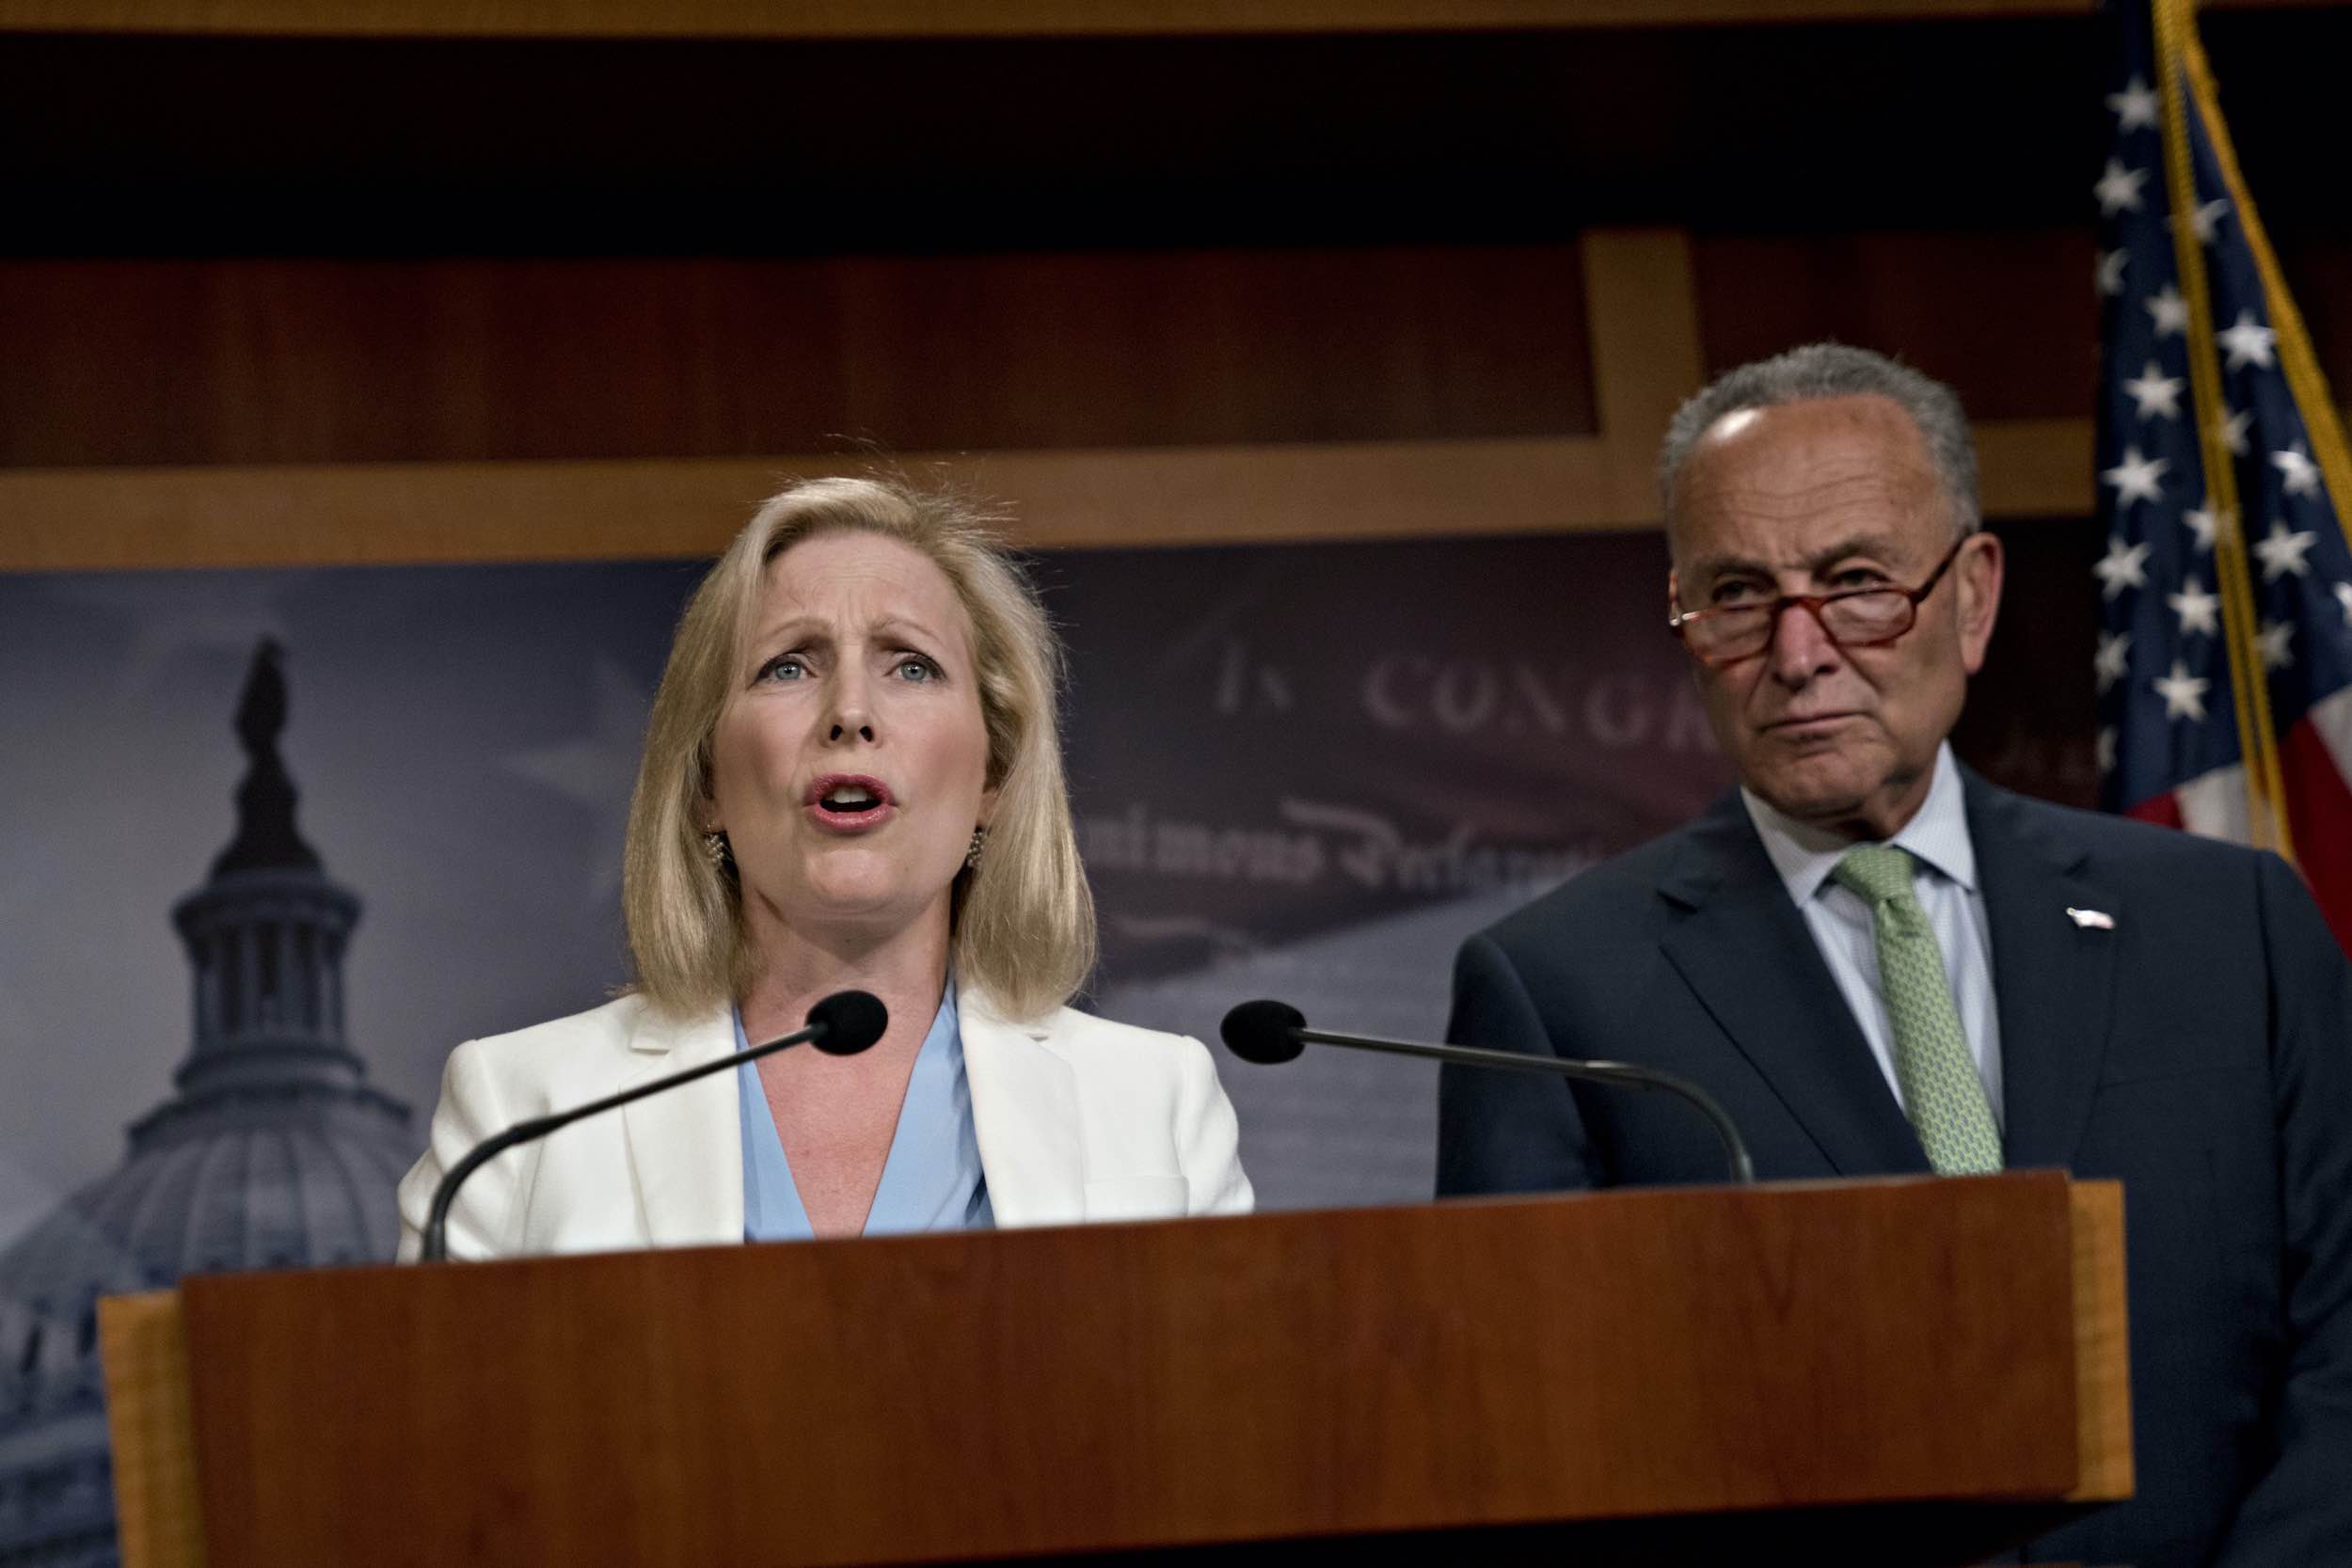 Senator Kirsten Gillibrand speaks at a podium during a news conference while Senate Minority Leader Chuck Schumer looks on.